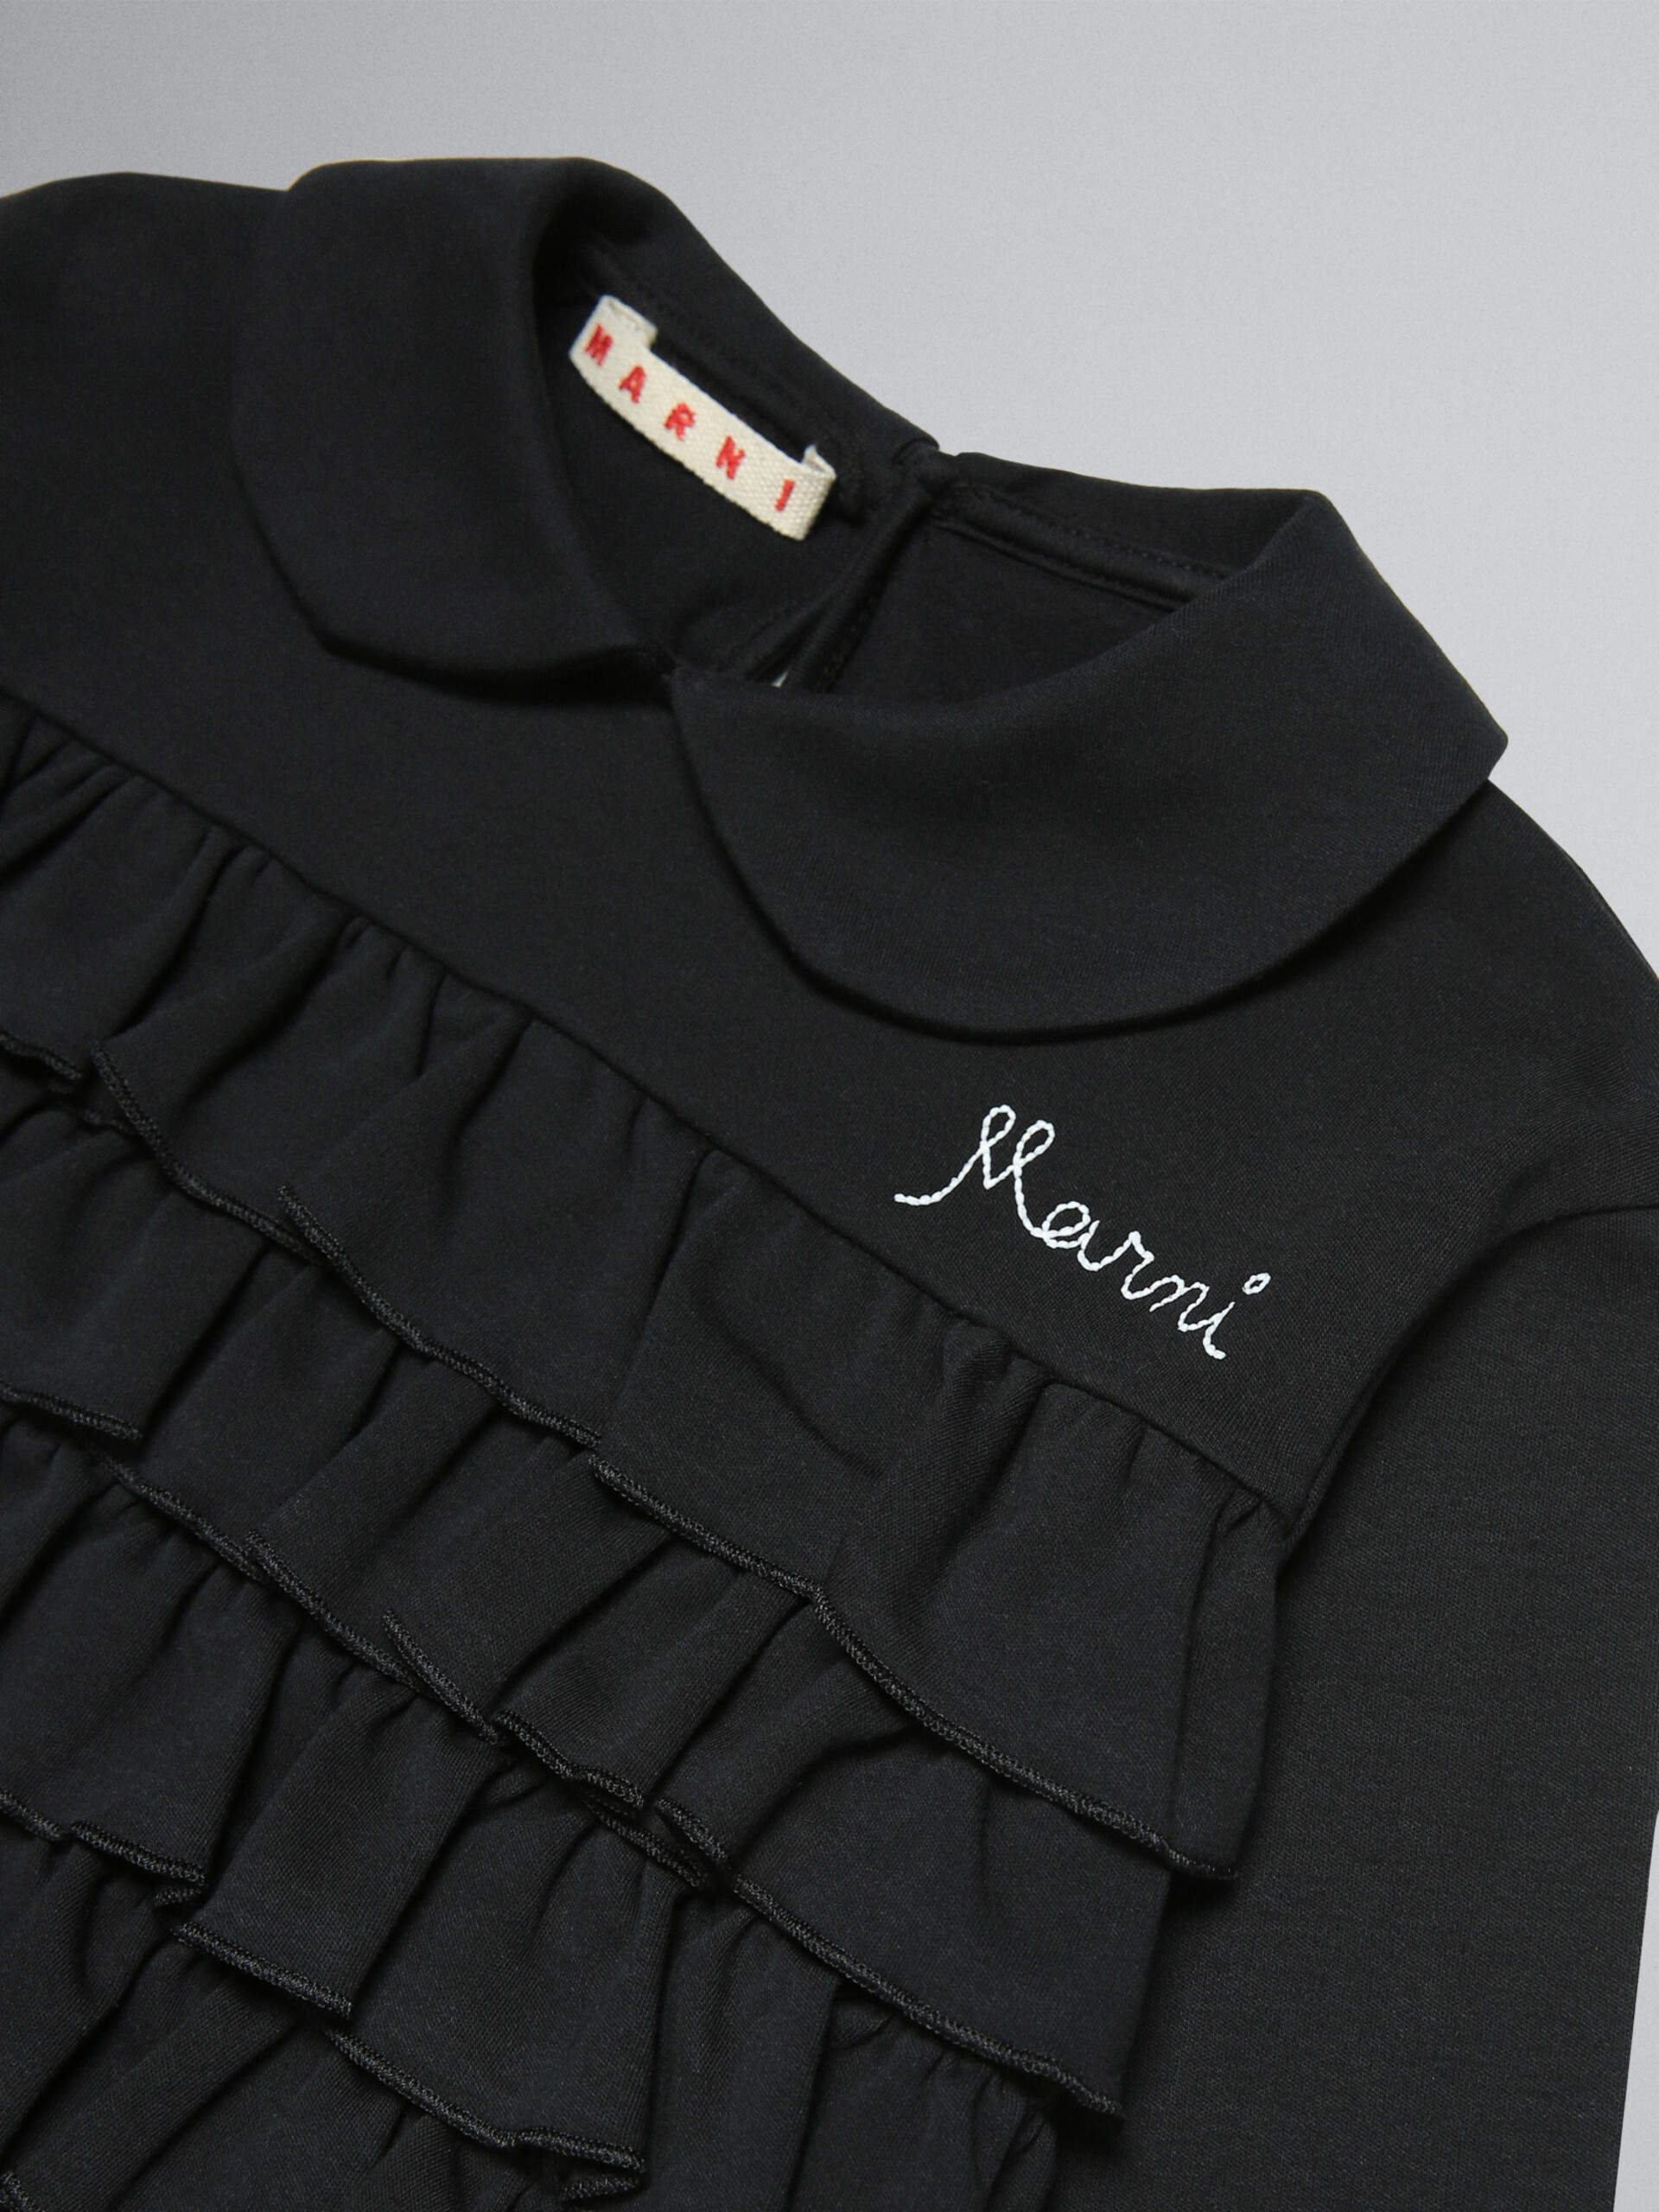 Black ruffle top with "Marni" embroidery - Sweaters - Image 3